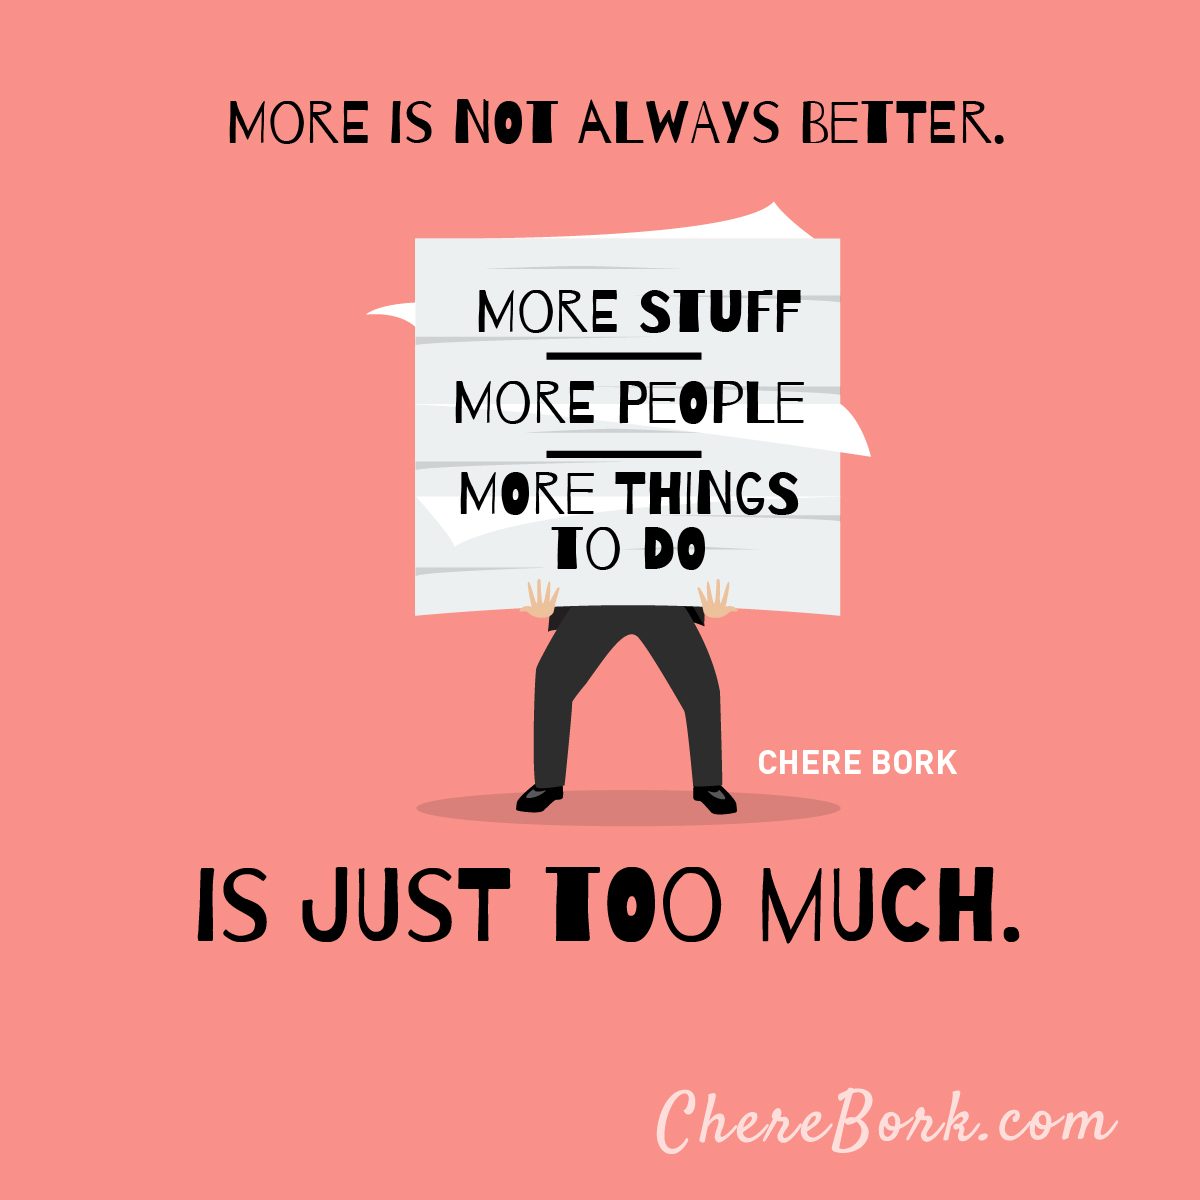 More is not always better. More stuff, more people, more things to do is just too much. -Chere Bork